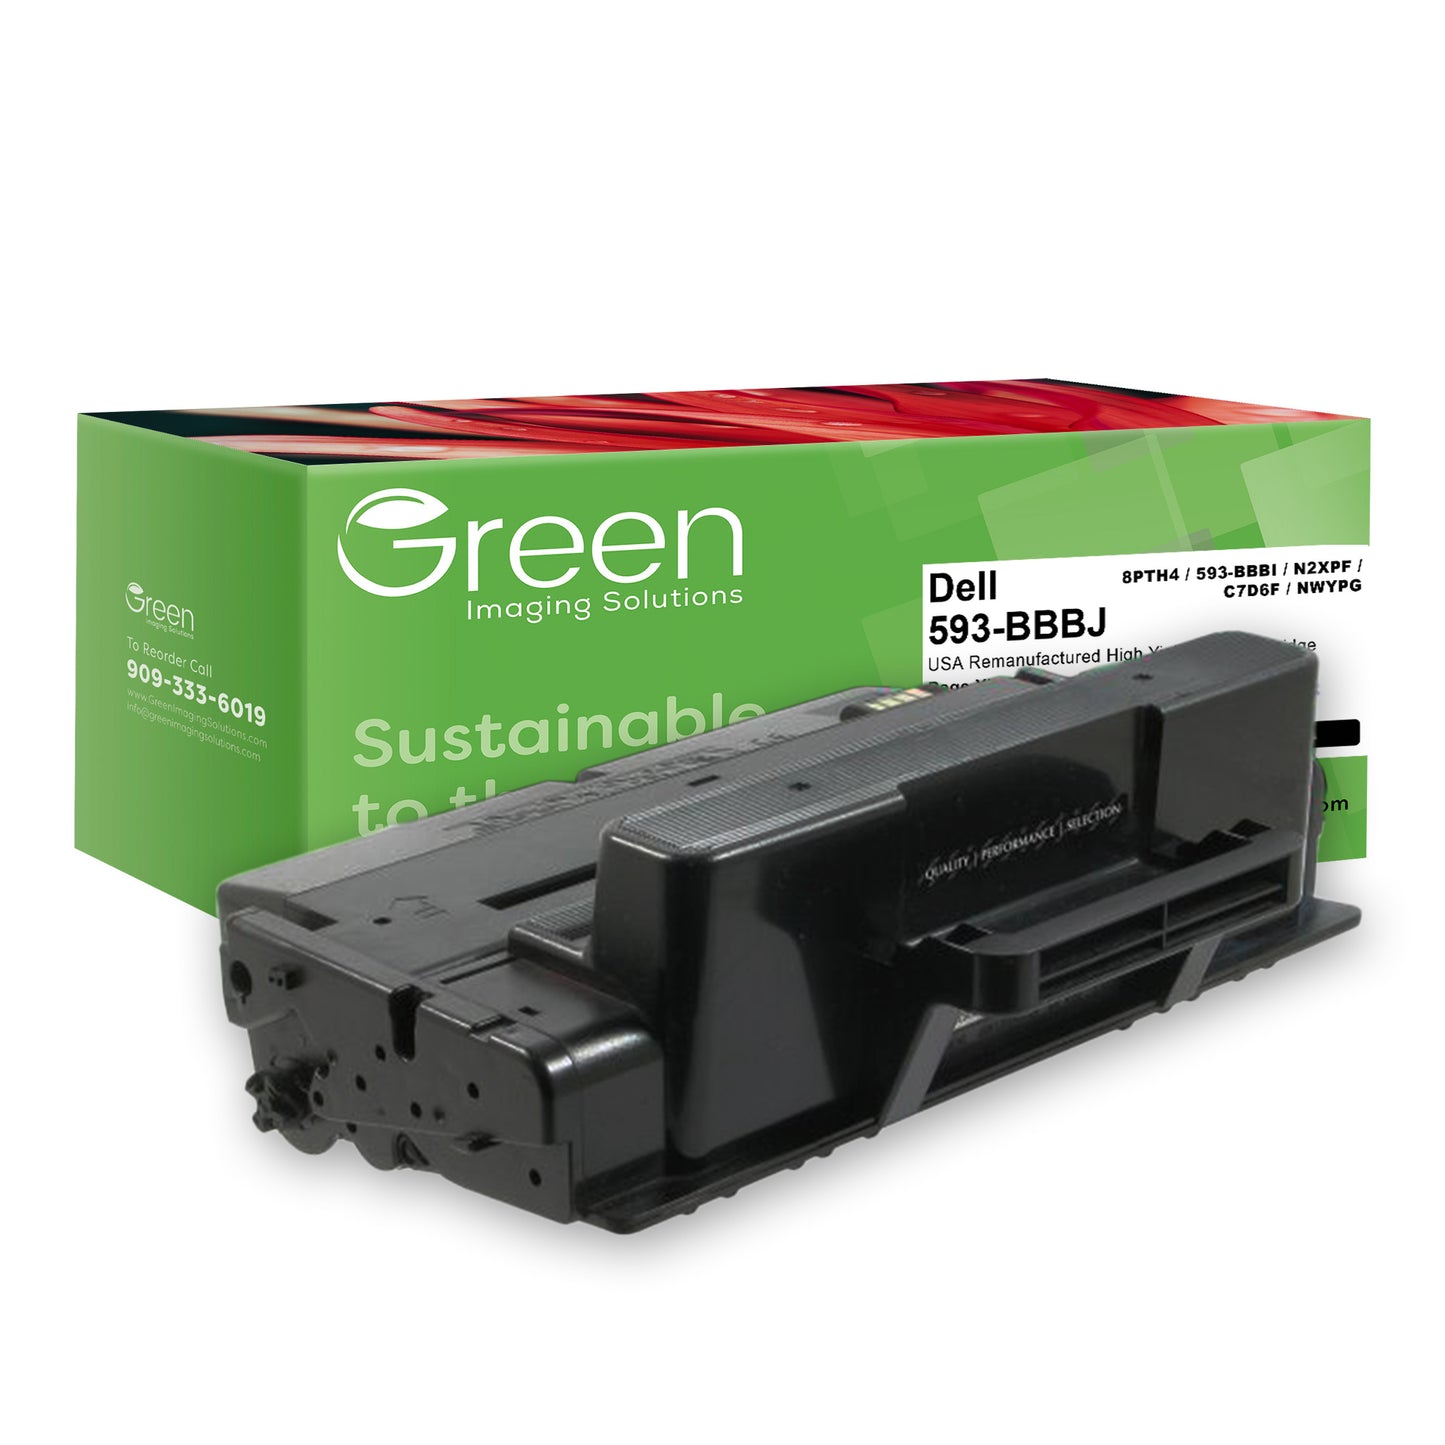 Green Imaging Solutions USA Remanufactured High Yield Toner Cartridge for Dell B2375